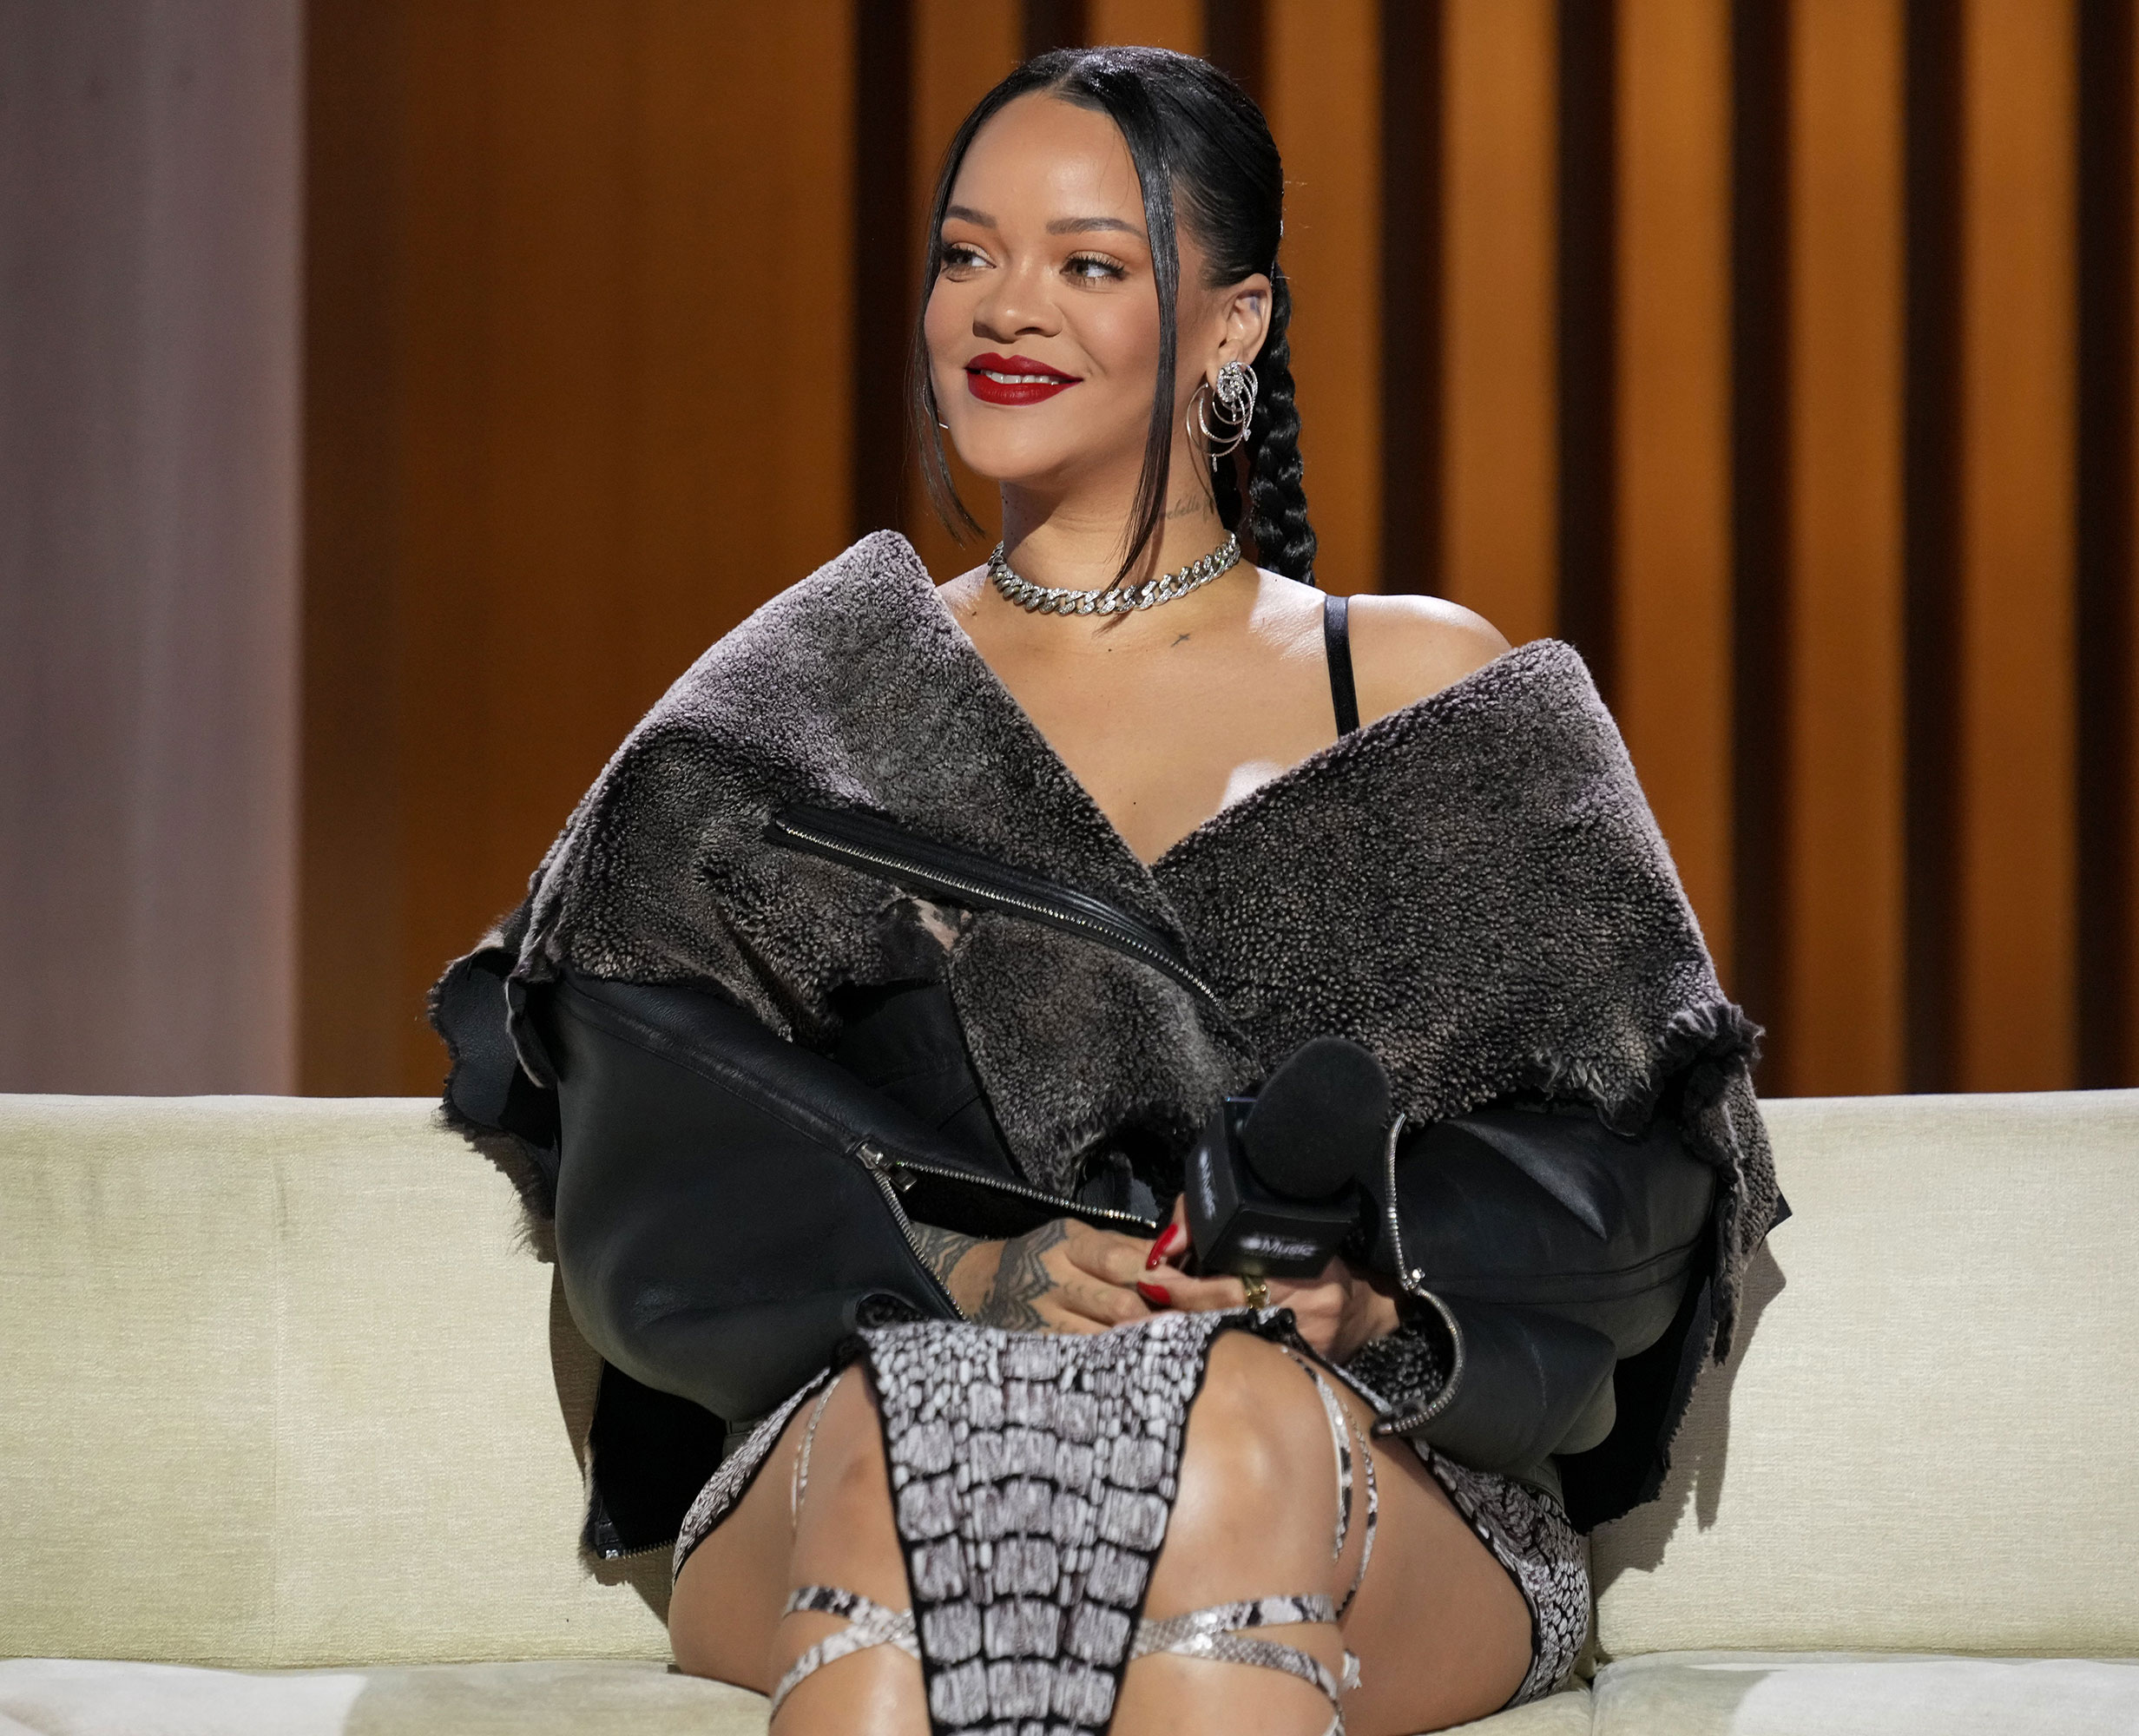 Rihanna Fenty collection: Lookbook, prices, release date and how